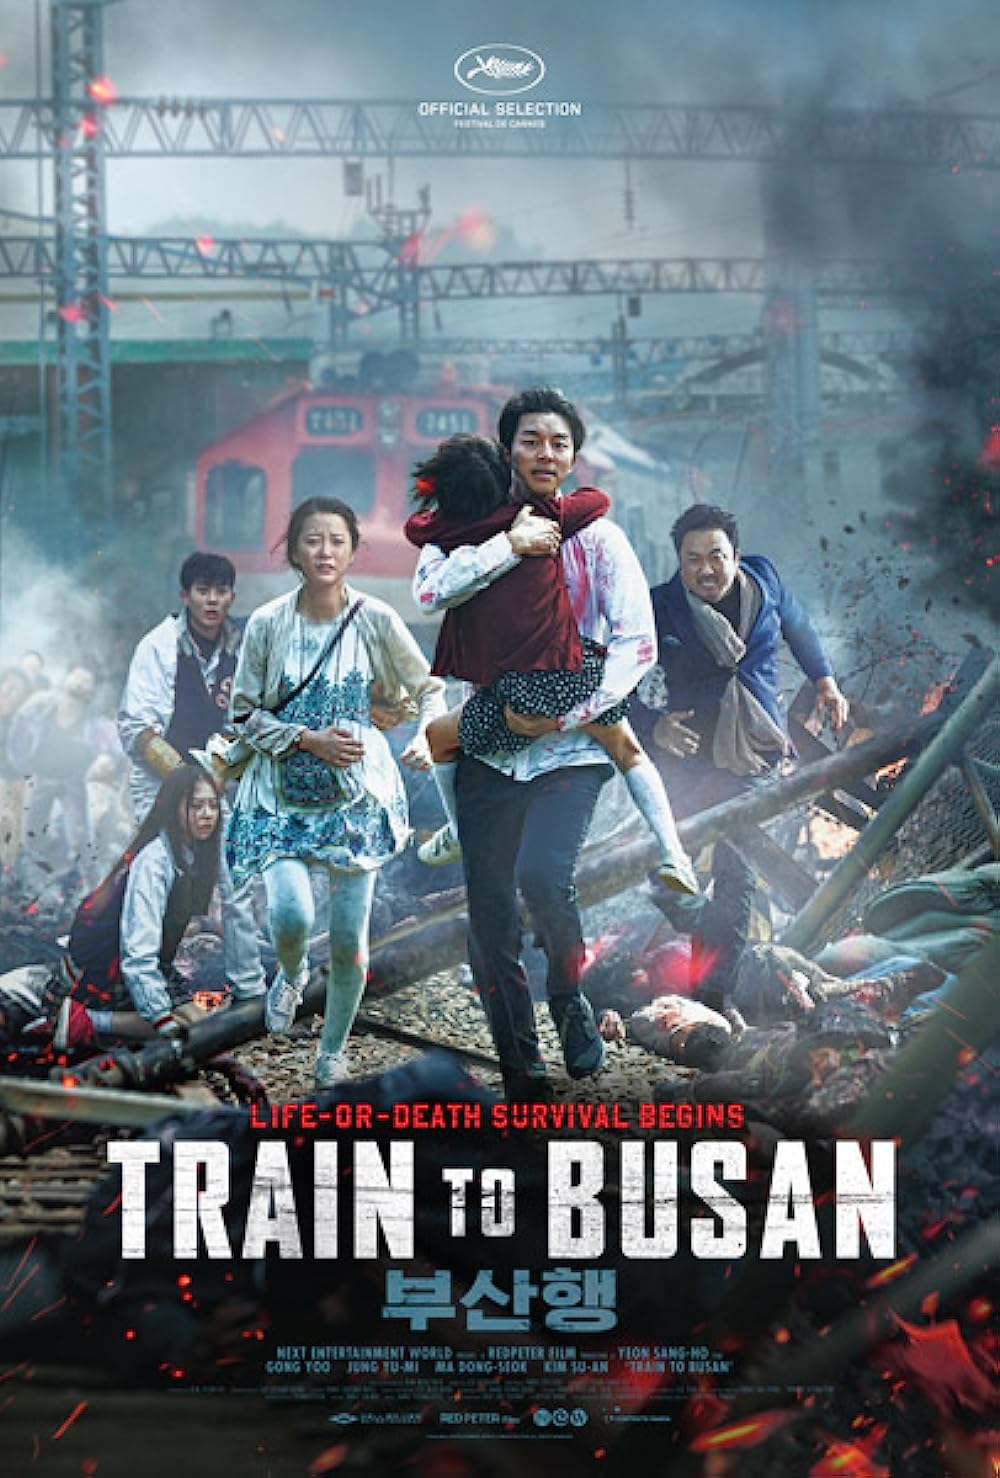 Train to Busan - Zombies movies Top 5 Action Movies